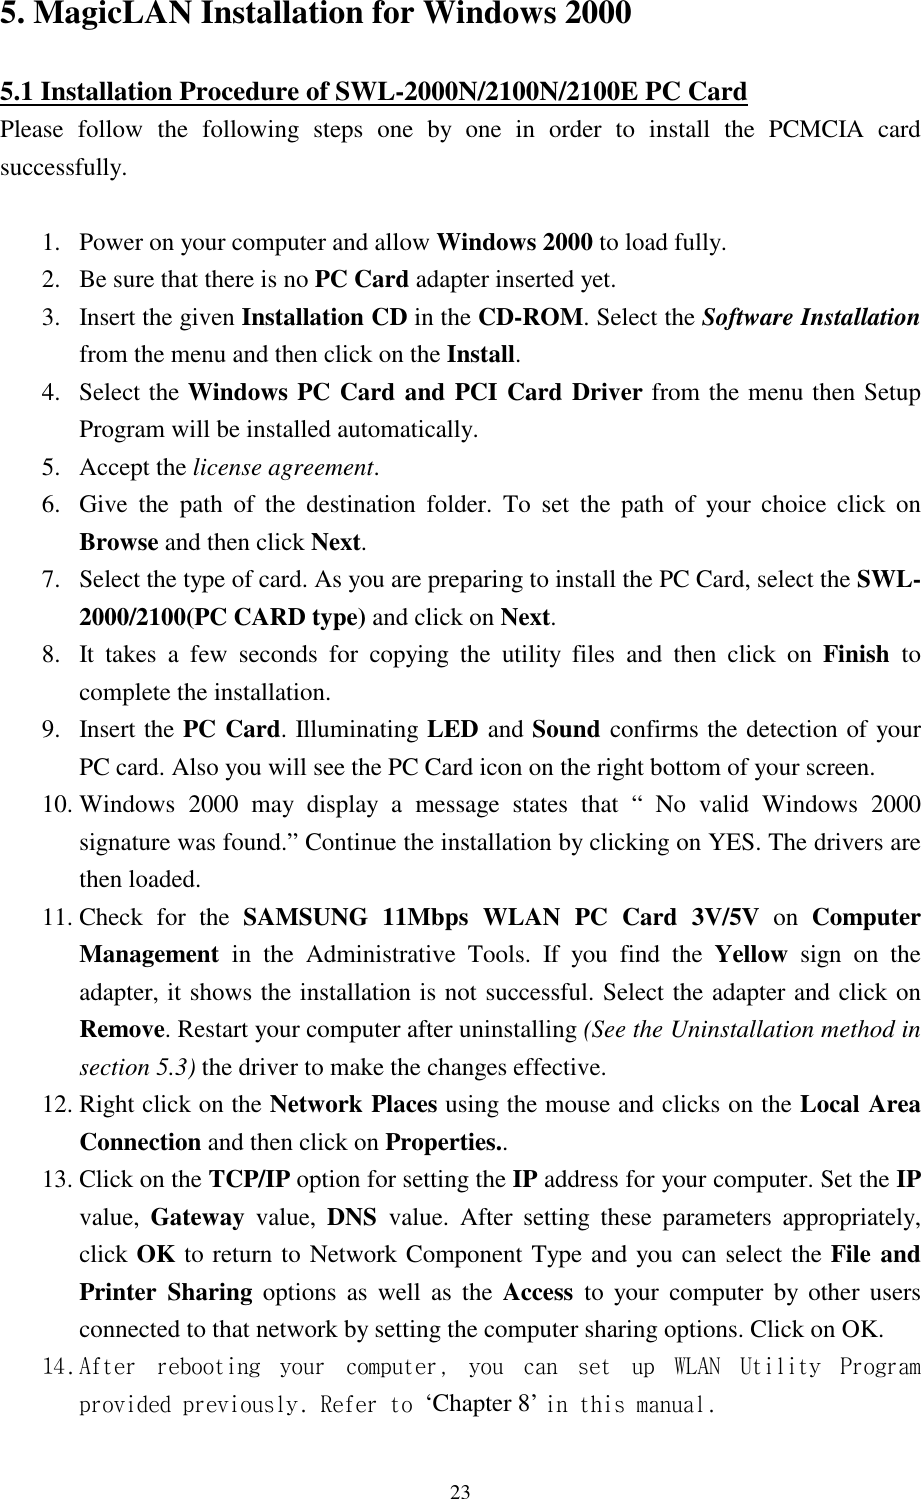  23 5. MagicLAN Installation for Windows 2000  5.1 Installation Procedure of SWL-2000N/2100N/2100E PC Card Please follow the following steps one by one in order to install the PCMCIA card successfully.  1.  Power on your computer and allow Windows 2000 to load fully. 2.  Be sure that there is no PC Card adapter inserted yet. 3.  Insert the given Installation CD in the CD-ROM. Select the Software Installation from the menu and then click on the Install.  4. Select the Windows PC Card and PCI Card Driver from the menu then Setup Program will be installed automatically.  5. Accept the license agreement. 6.  Give the path of the destination folder. To set the path of your choice click on Browse and then click Next. 7.  Select the type of card. As you are preparing to install the PC Card, select the SWL-2000/2100(PC CARD type) and click on Next. 8.  It takes a few seconds for copying the utility files and then click on Finish  to complete the installation. 9. Insert the PC Card. Illuminating LED and Sound confirms the detection of your PC card. Also you will see the PC Card icon on the right bottom of your screen. 10. Windows 2000 may display a message states that “ No valid Windows 2000 signature was found.” Continue the installation by clicking on YES. The drivers are then loaded.  11. Check  for  the  SAMSUNG 11Mbps WLAN PC Card 3V/5V on Computer Management  in the Administrative Tools. If you find the Yellow sign on the adapter, it shows the installation is not successful. Select the adapter and click on Remove. Restart your computer after uninstalling (See the Uninstallation method in section 5.3) the driver to make the changes effective.  12. Right click on the Network Places using the mouse and clicks on the Local Area Connection and then click on Properties.. 13. Click on the TCP/IP option for setting the IP address for your computer. Set the IP value,  Gateway value, DNS  value. After setting these parameters appropriately, click OK to return to Network Component Type and you can select the File and Printer Sharing options as well as the Access  to your computer by other users connected to that network by setting the computer sharing options. Click on OK. 14. After rebooting your computer, you can set up WLAN Utility Program provided previously. Refer to ‘Chapter 8’ in this manual.     